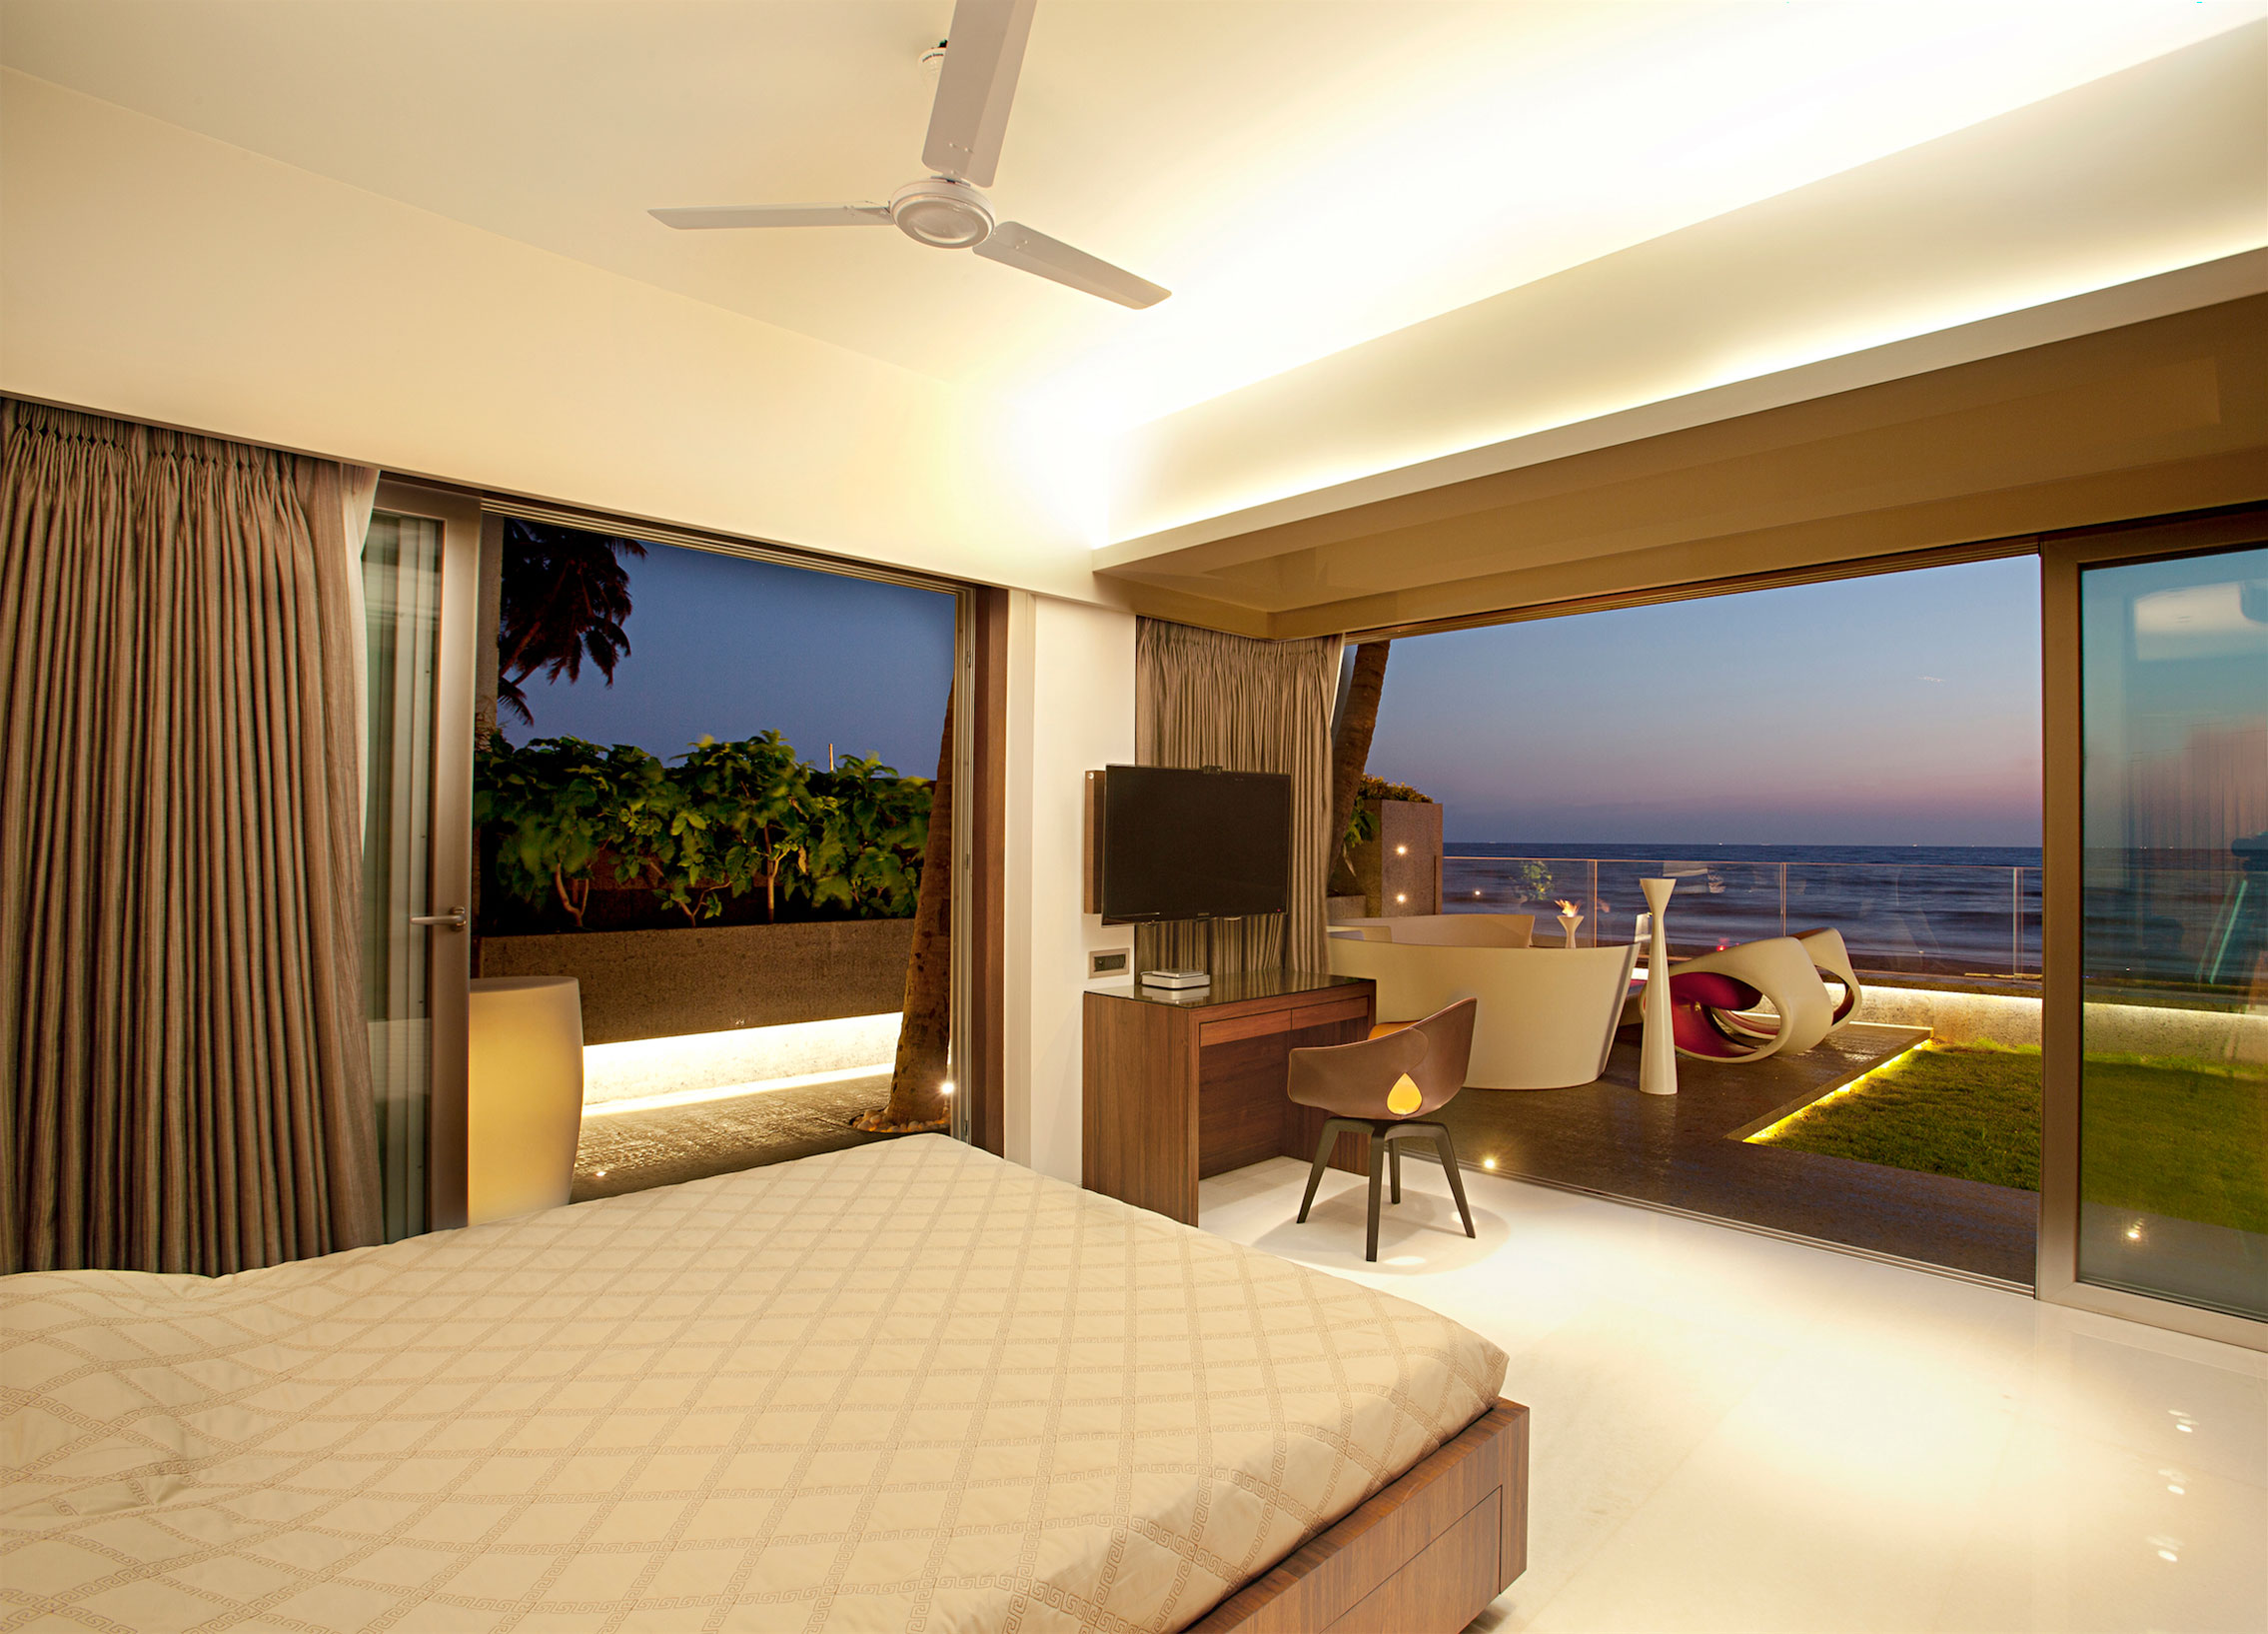 Romantic Bedroom Lighting Warm Romantic Bedroom Beach Apartment Lighting Ideas With Glass Sliding Door With Brown Window Curtains Apartment Stylish Beach Apartment With Stunning Terrace And Ocean View